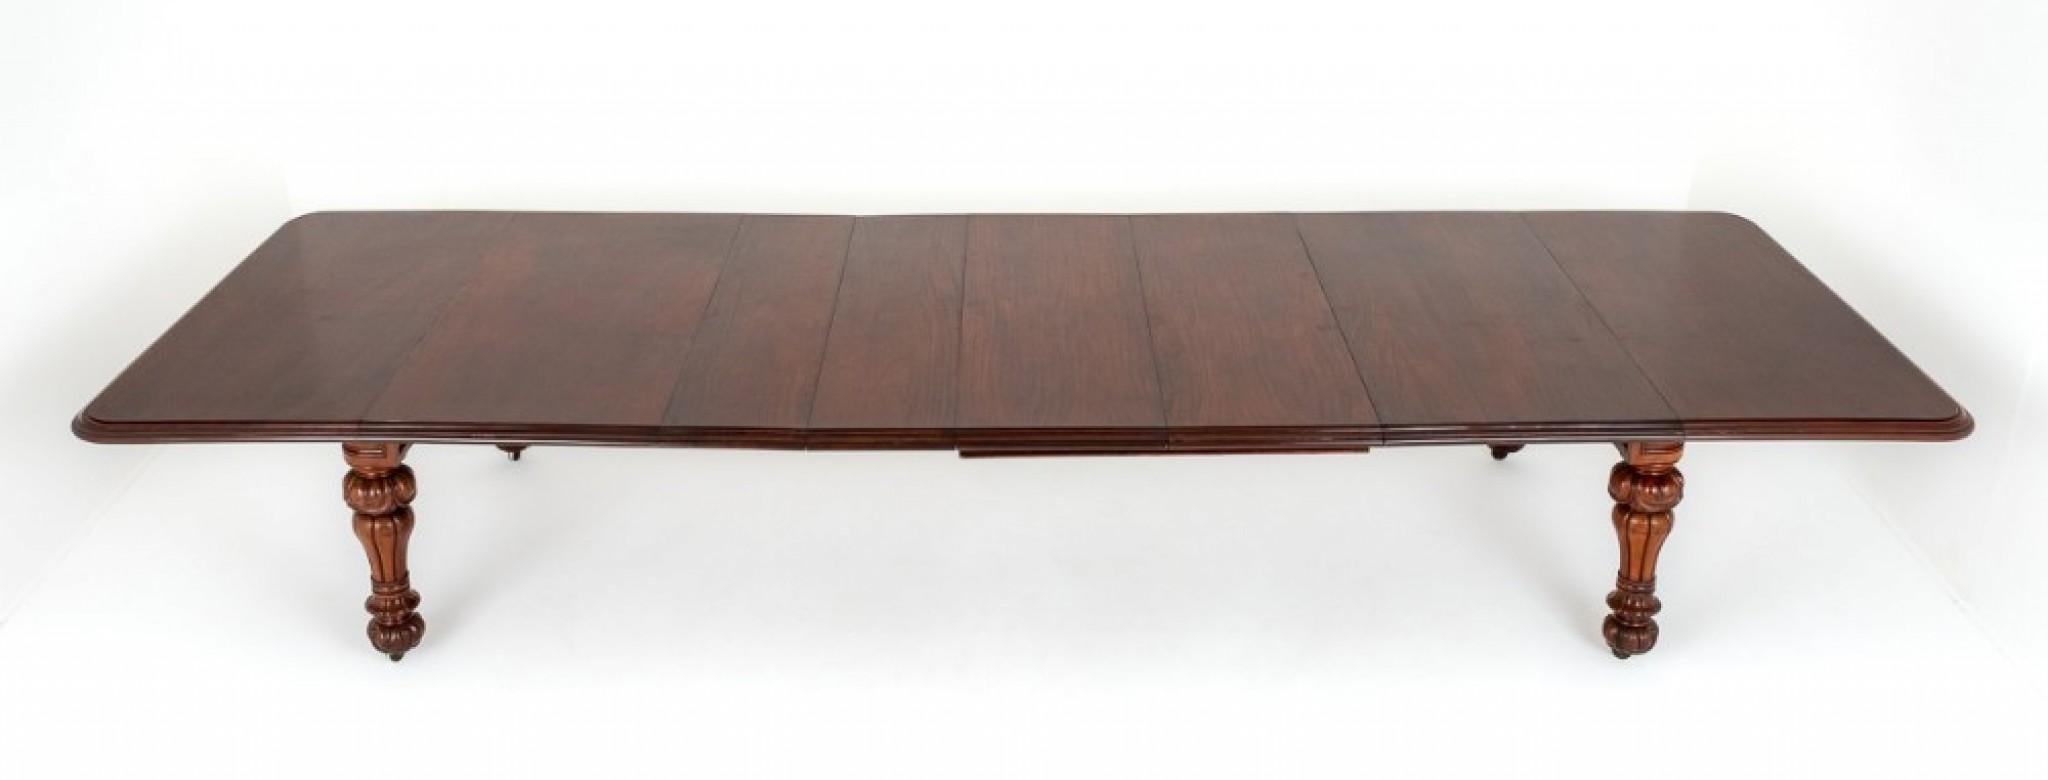 Victorian Dining Table Antique Mahogany Extending, 1860 4